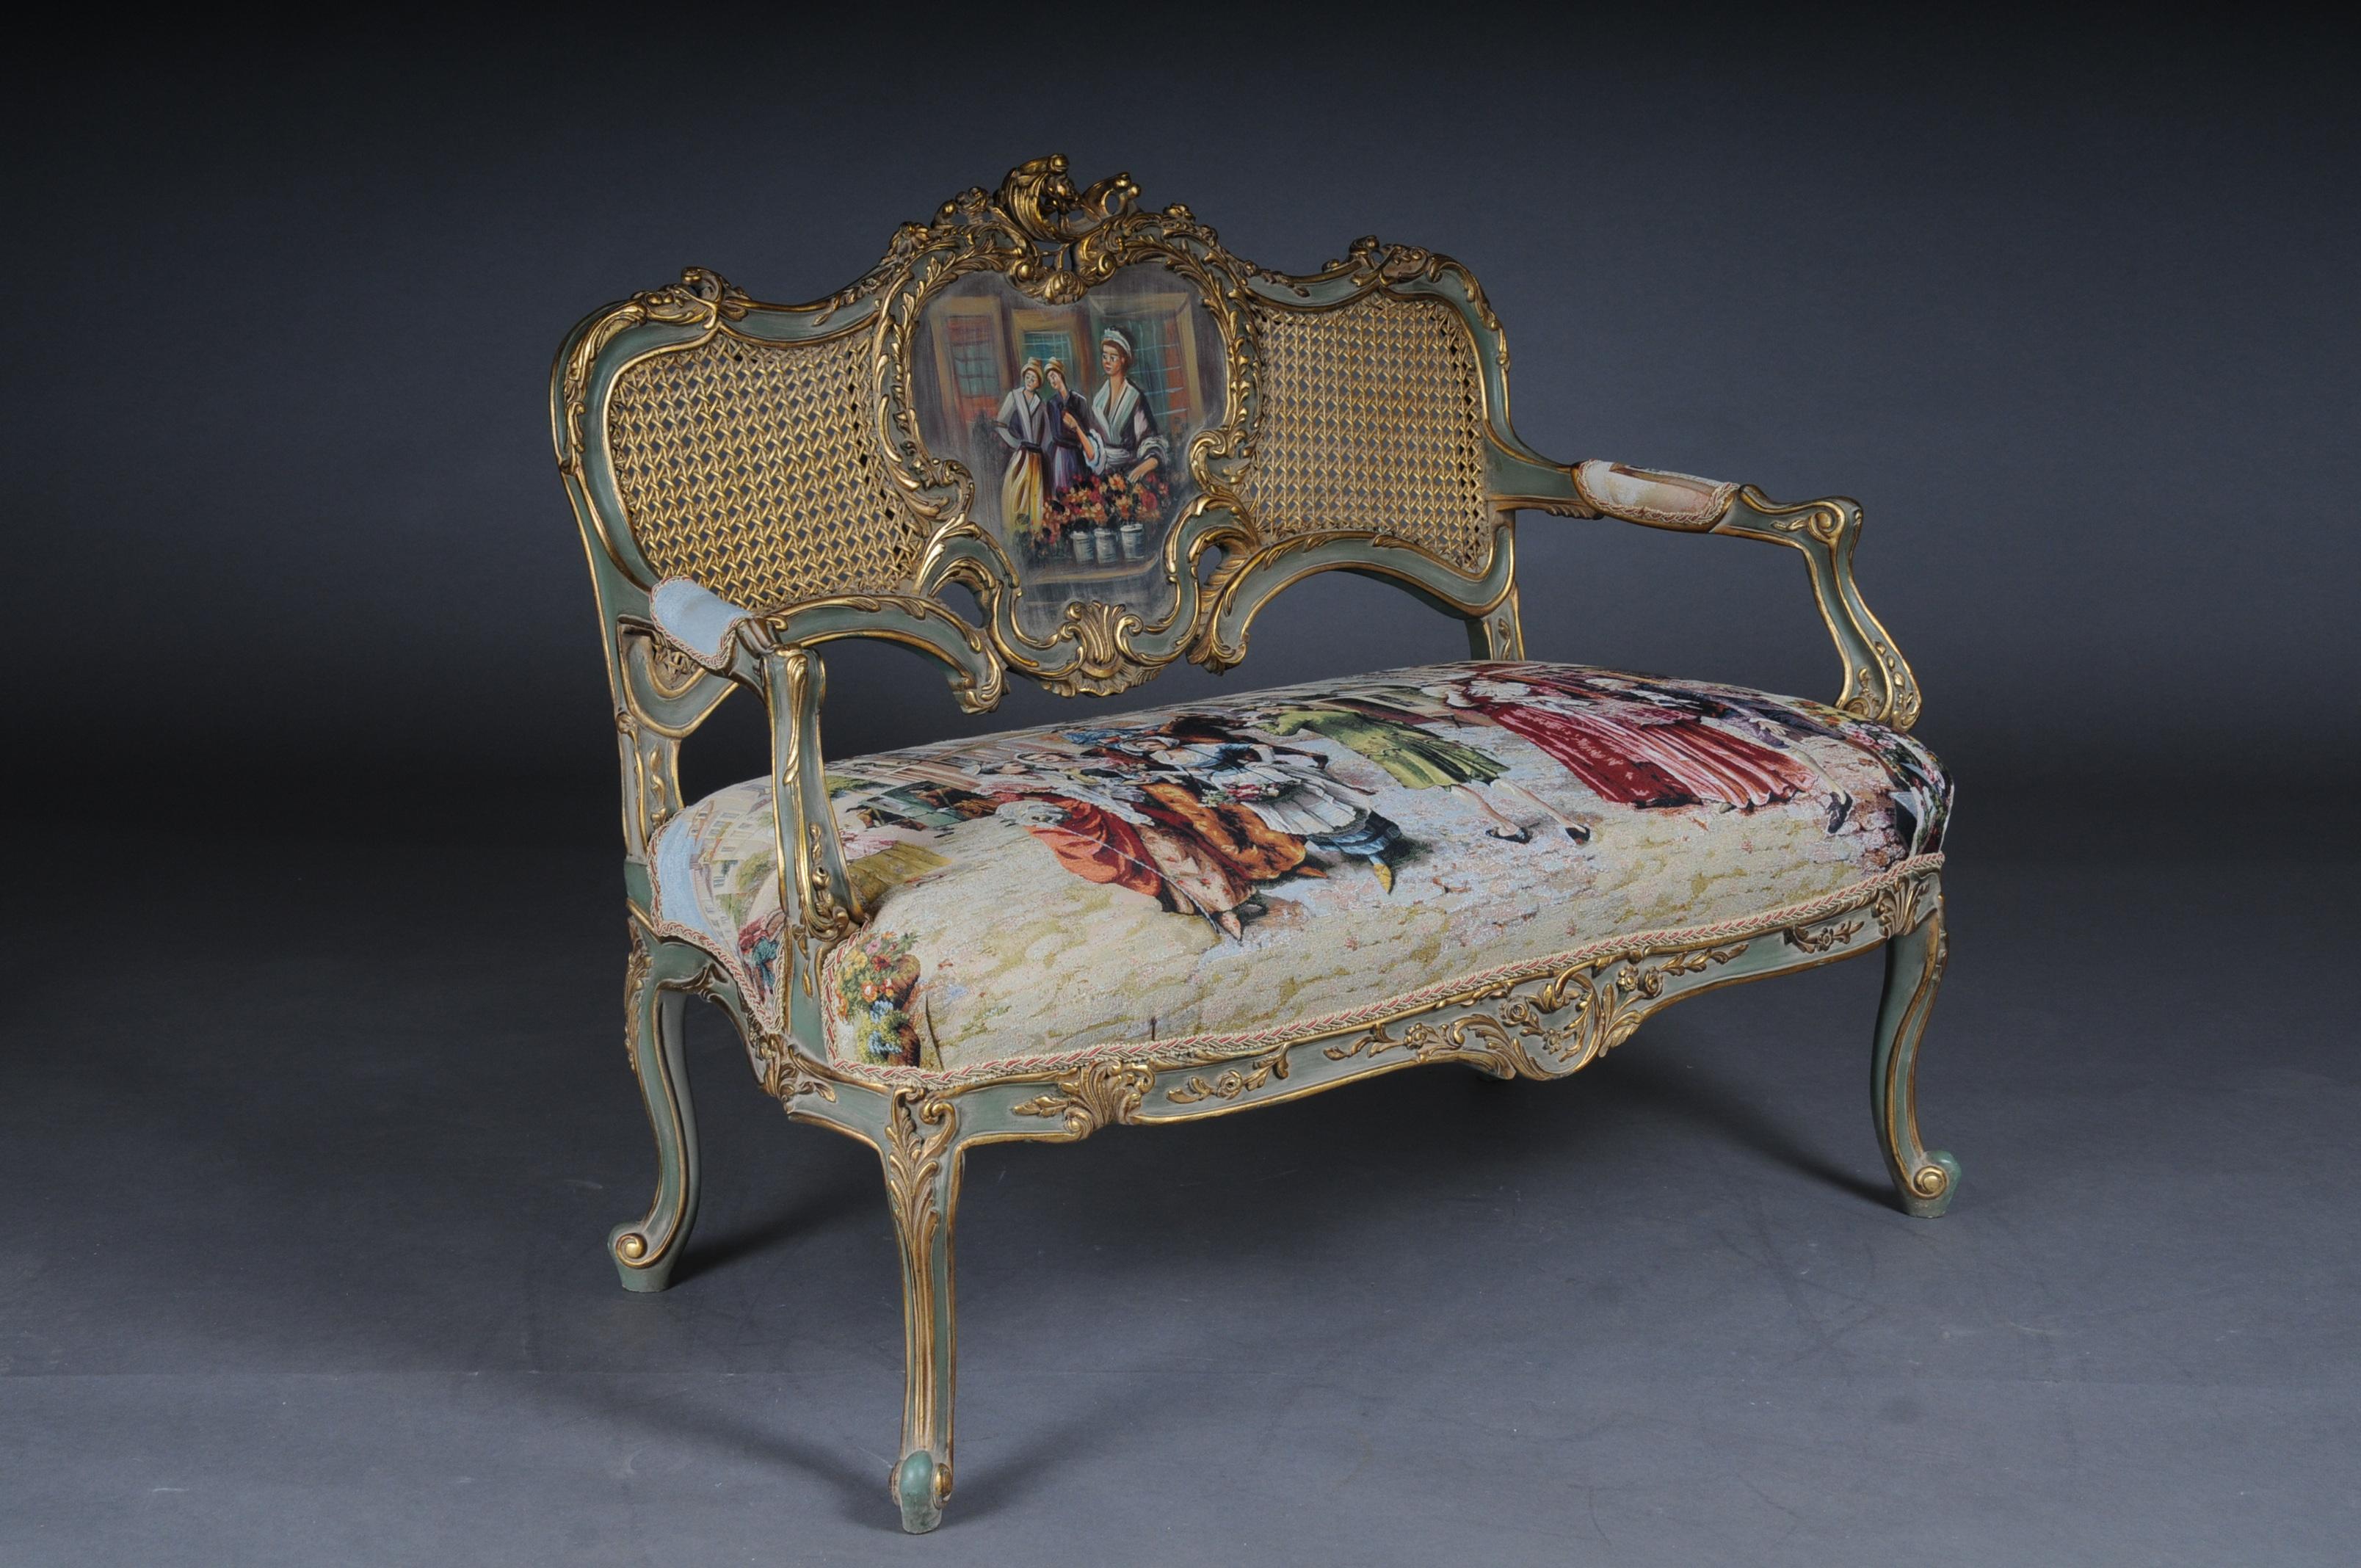 20th Century Beautiful Sofa, Couch, Canapé in Rococo or Louis XV Style For Sale 6